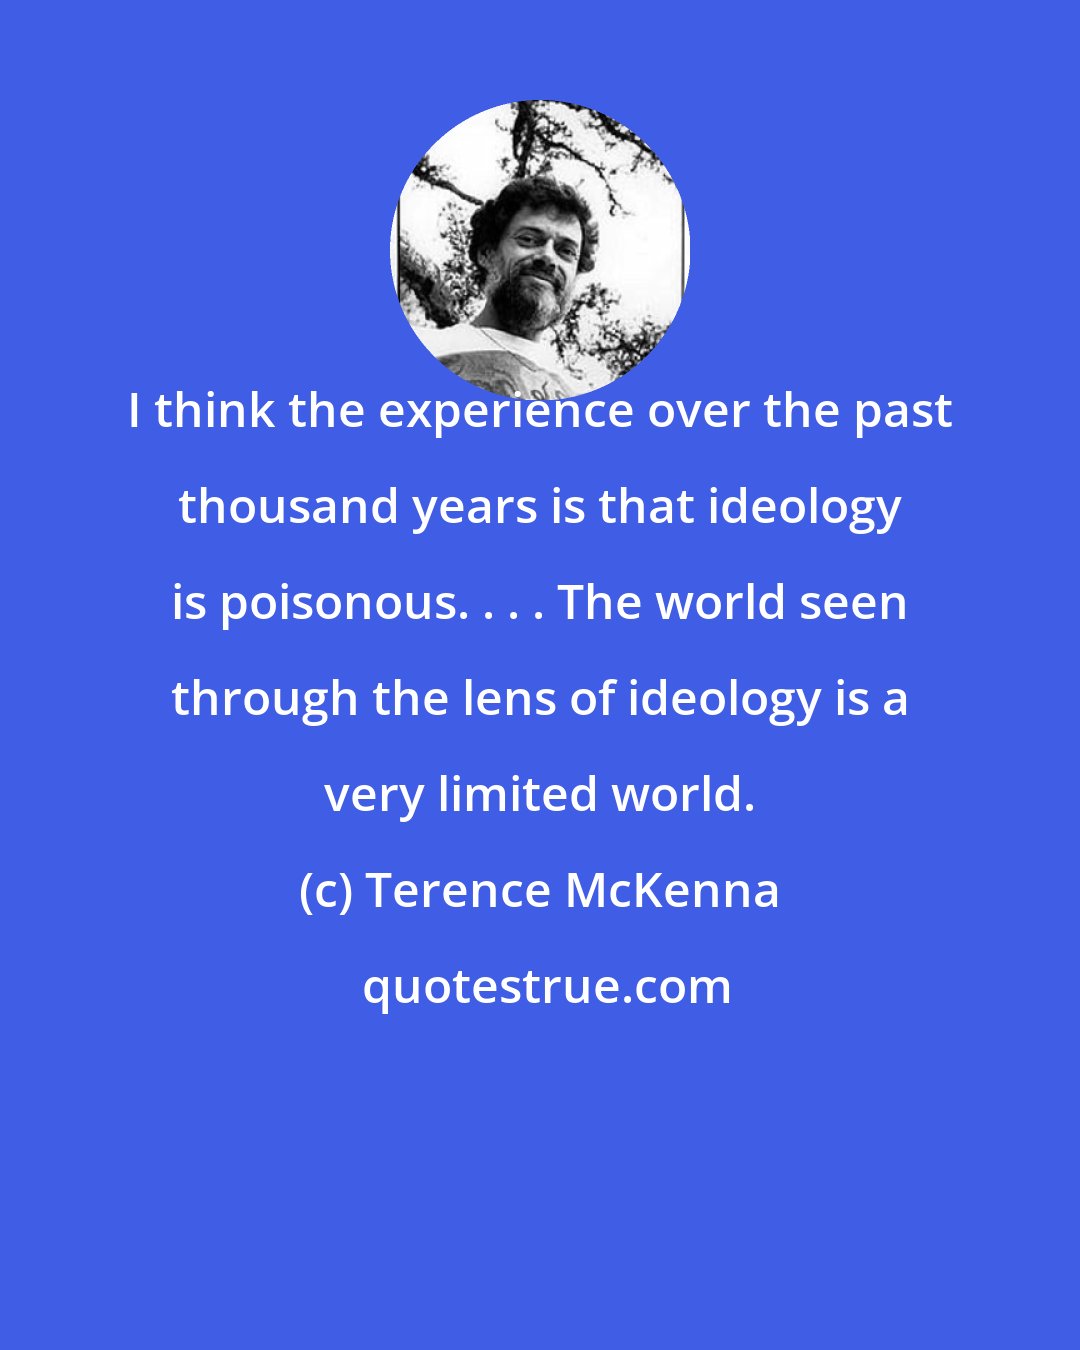 Terence McKenna: I think the experience over the past thousand years is that ideology is poisonous. . . . The world seen through the lens of ideology is a very limited world.